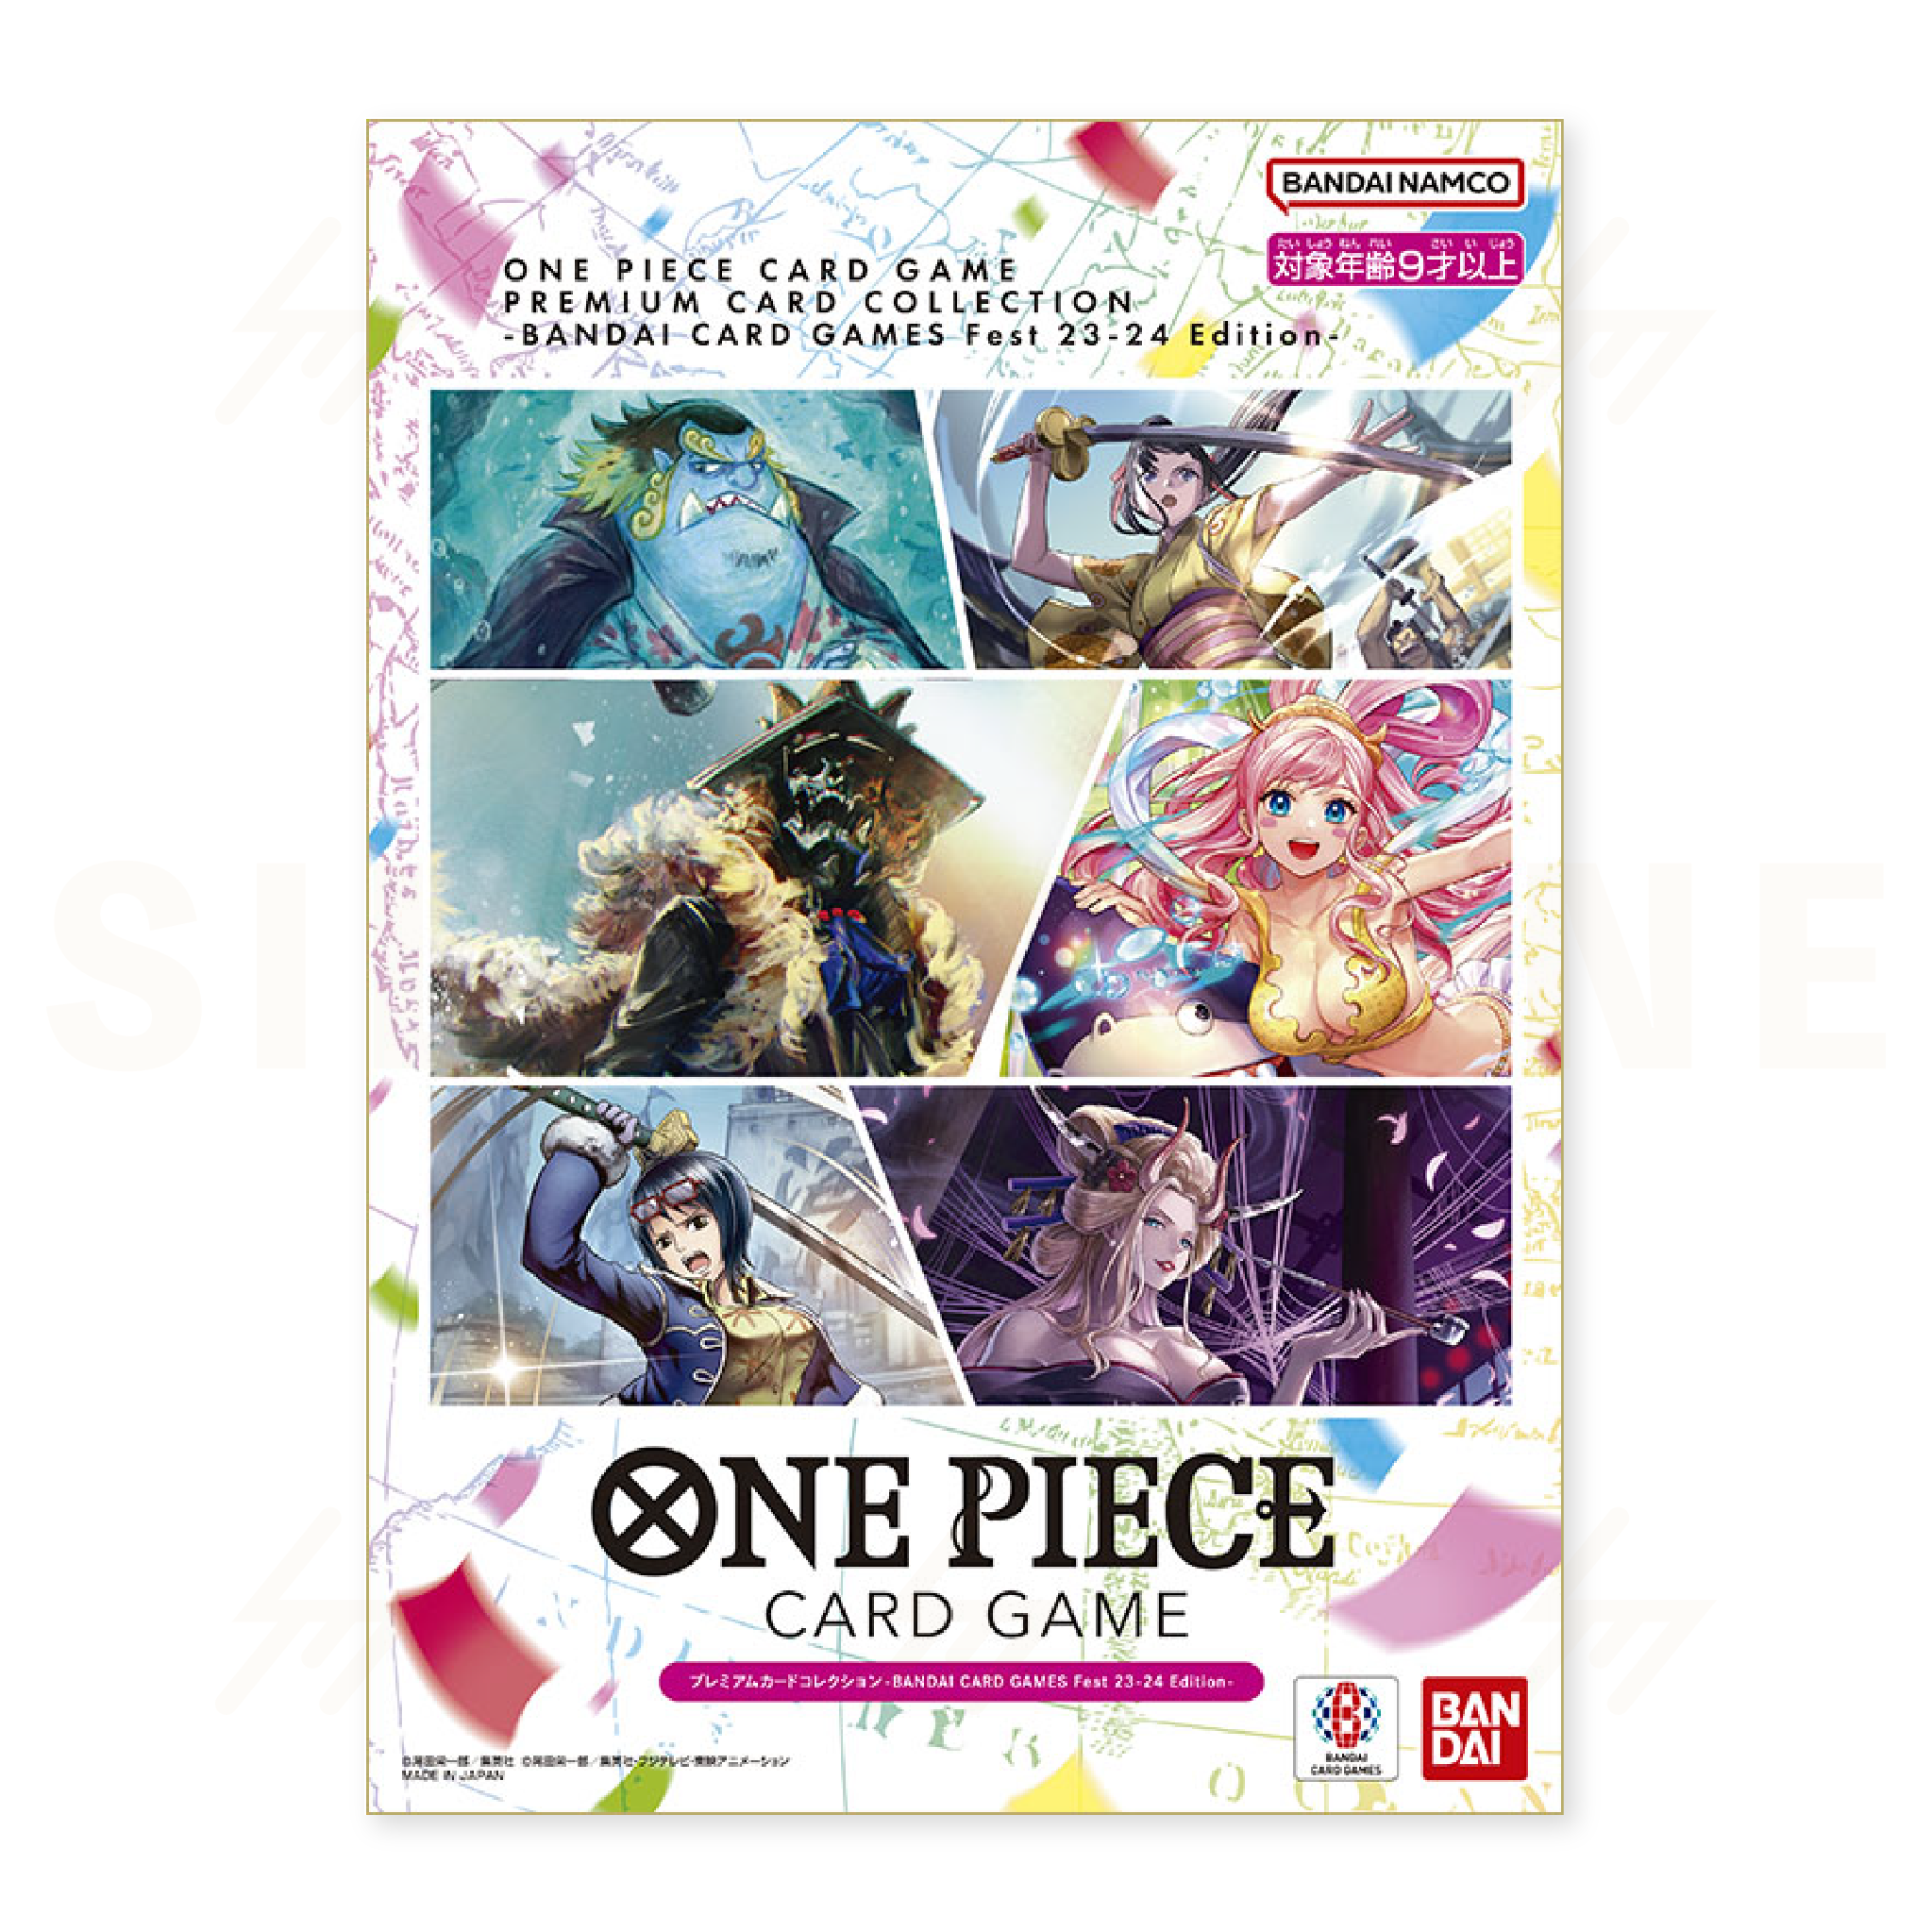 One Piece - Premium Card Collection - BANDAI CARD GAMES Fest. 23-24 Edition -